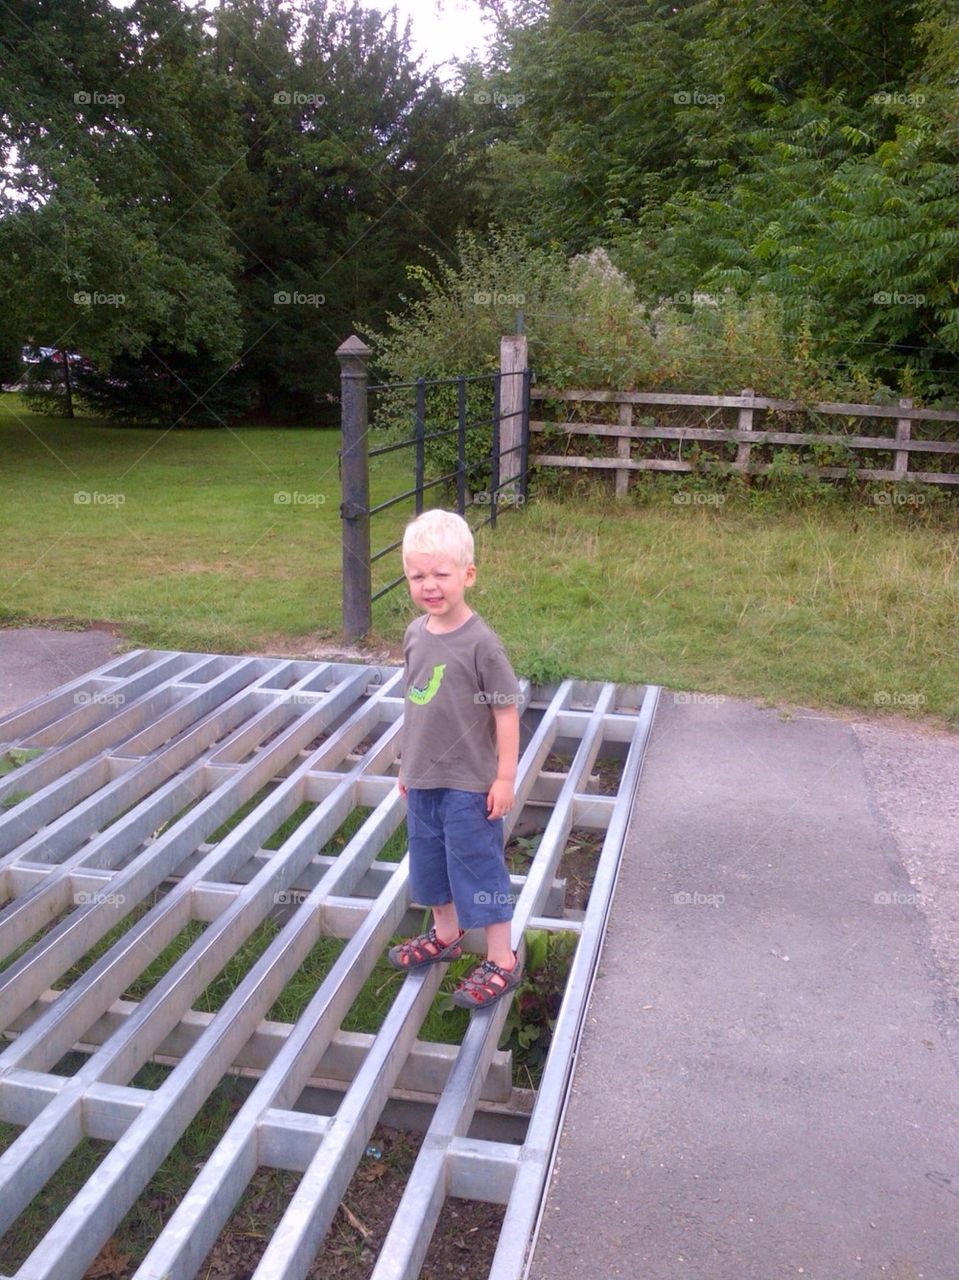 Negotiating the cattle grid.